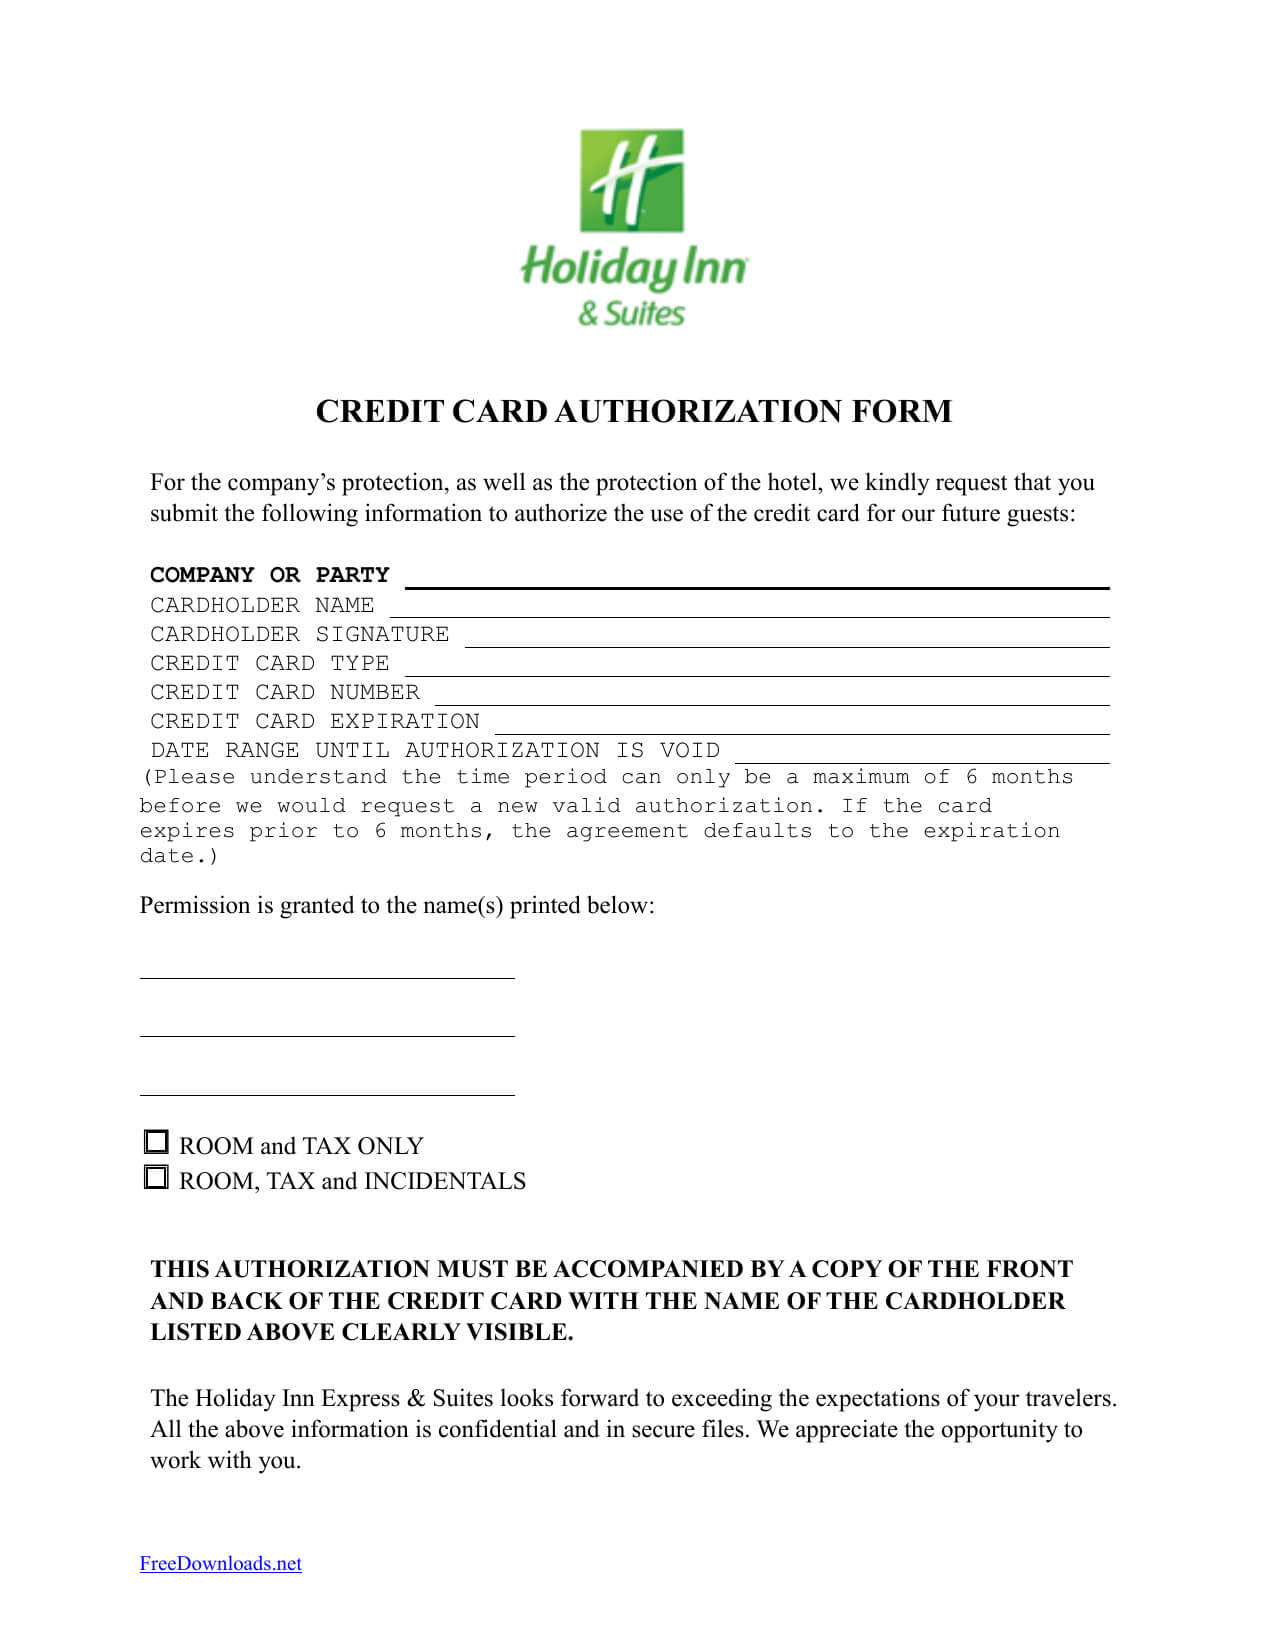 One Time Credit Card Authorization Form Inside Hotel Credit Card Authorization Form Template